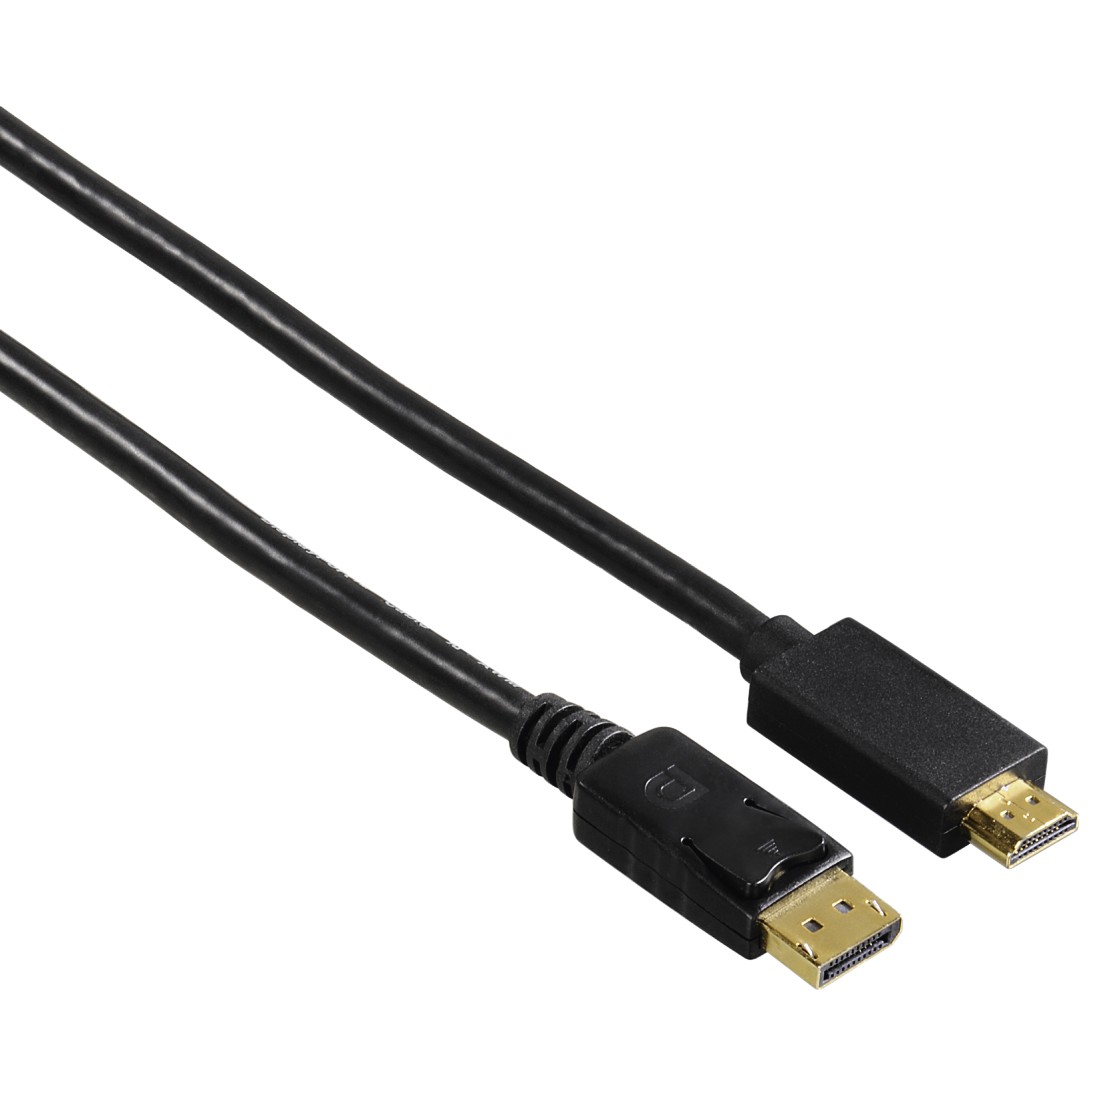 00122214 Hama DisplayPort Adapter Cable for HDMI™, Ultra HD, 1.80 m